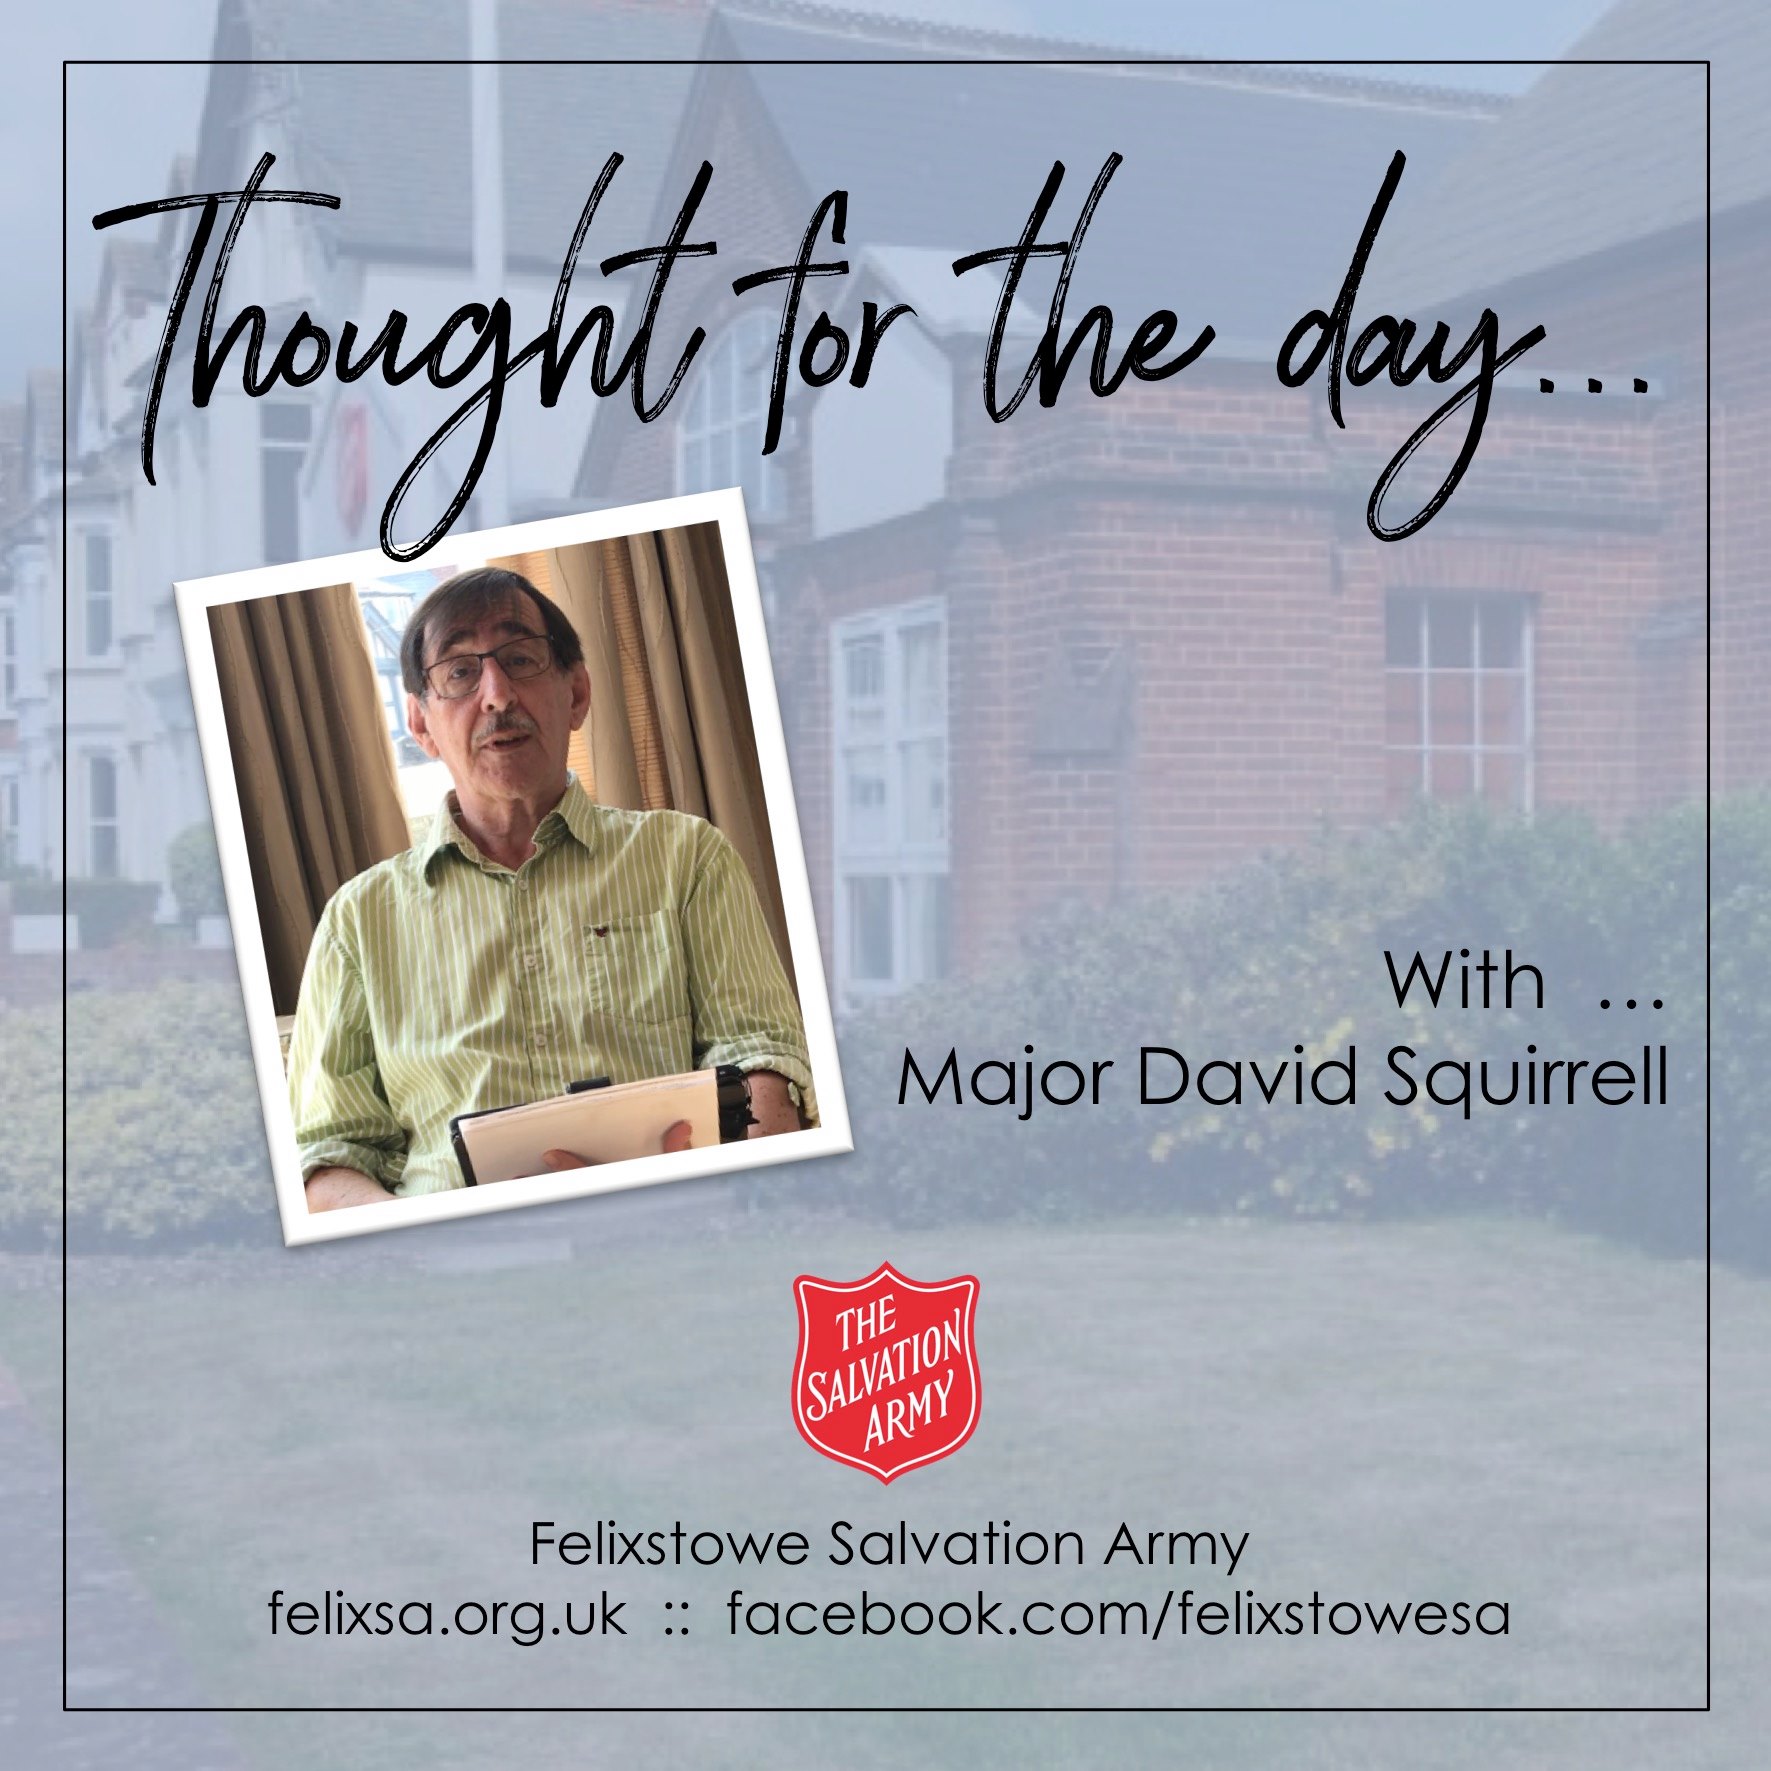 Thought for the Day with Major David Squirrell